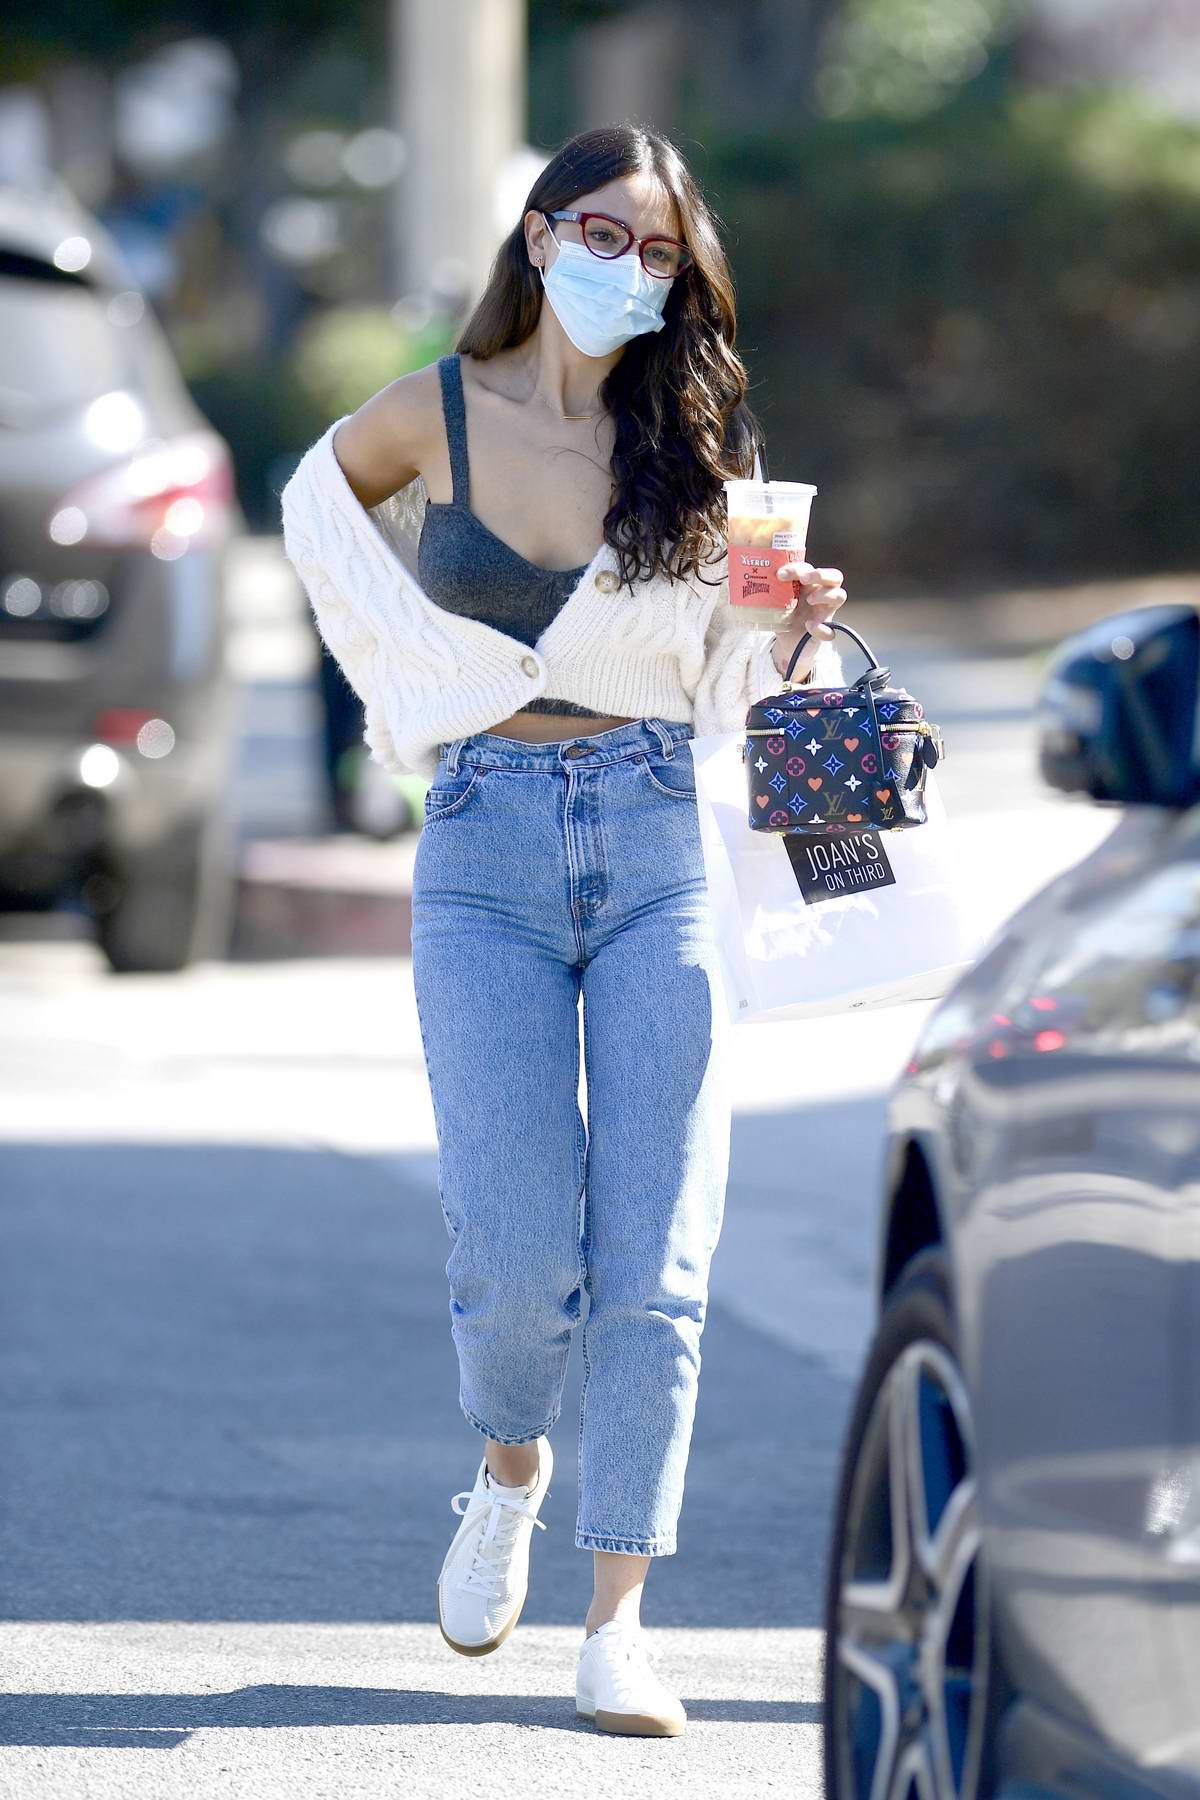 eiza gonzalez looks cute in a black crop top, jeans and sneakers while  making her morning coffee run in los angeles-281020_12